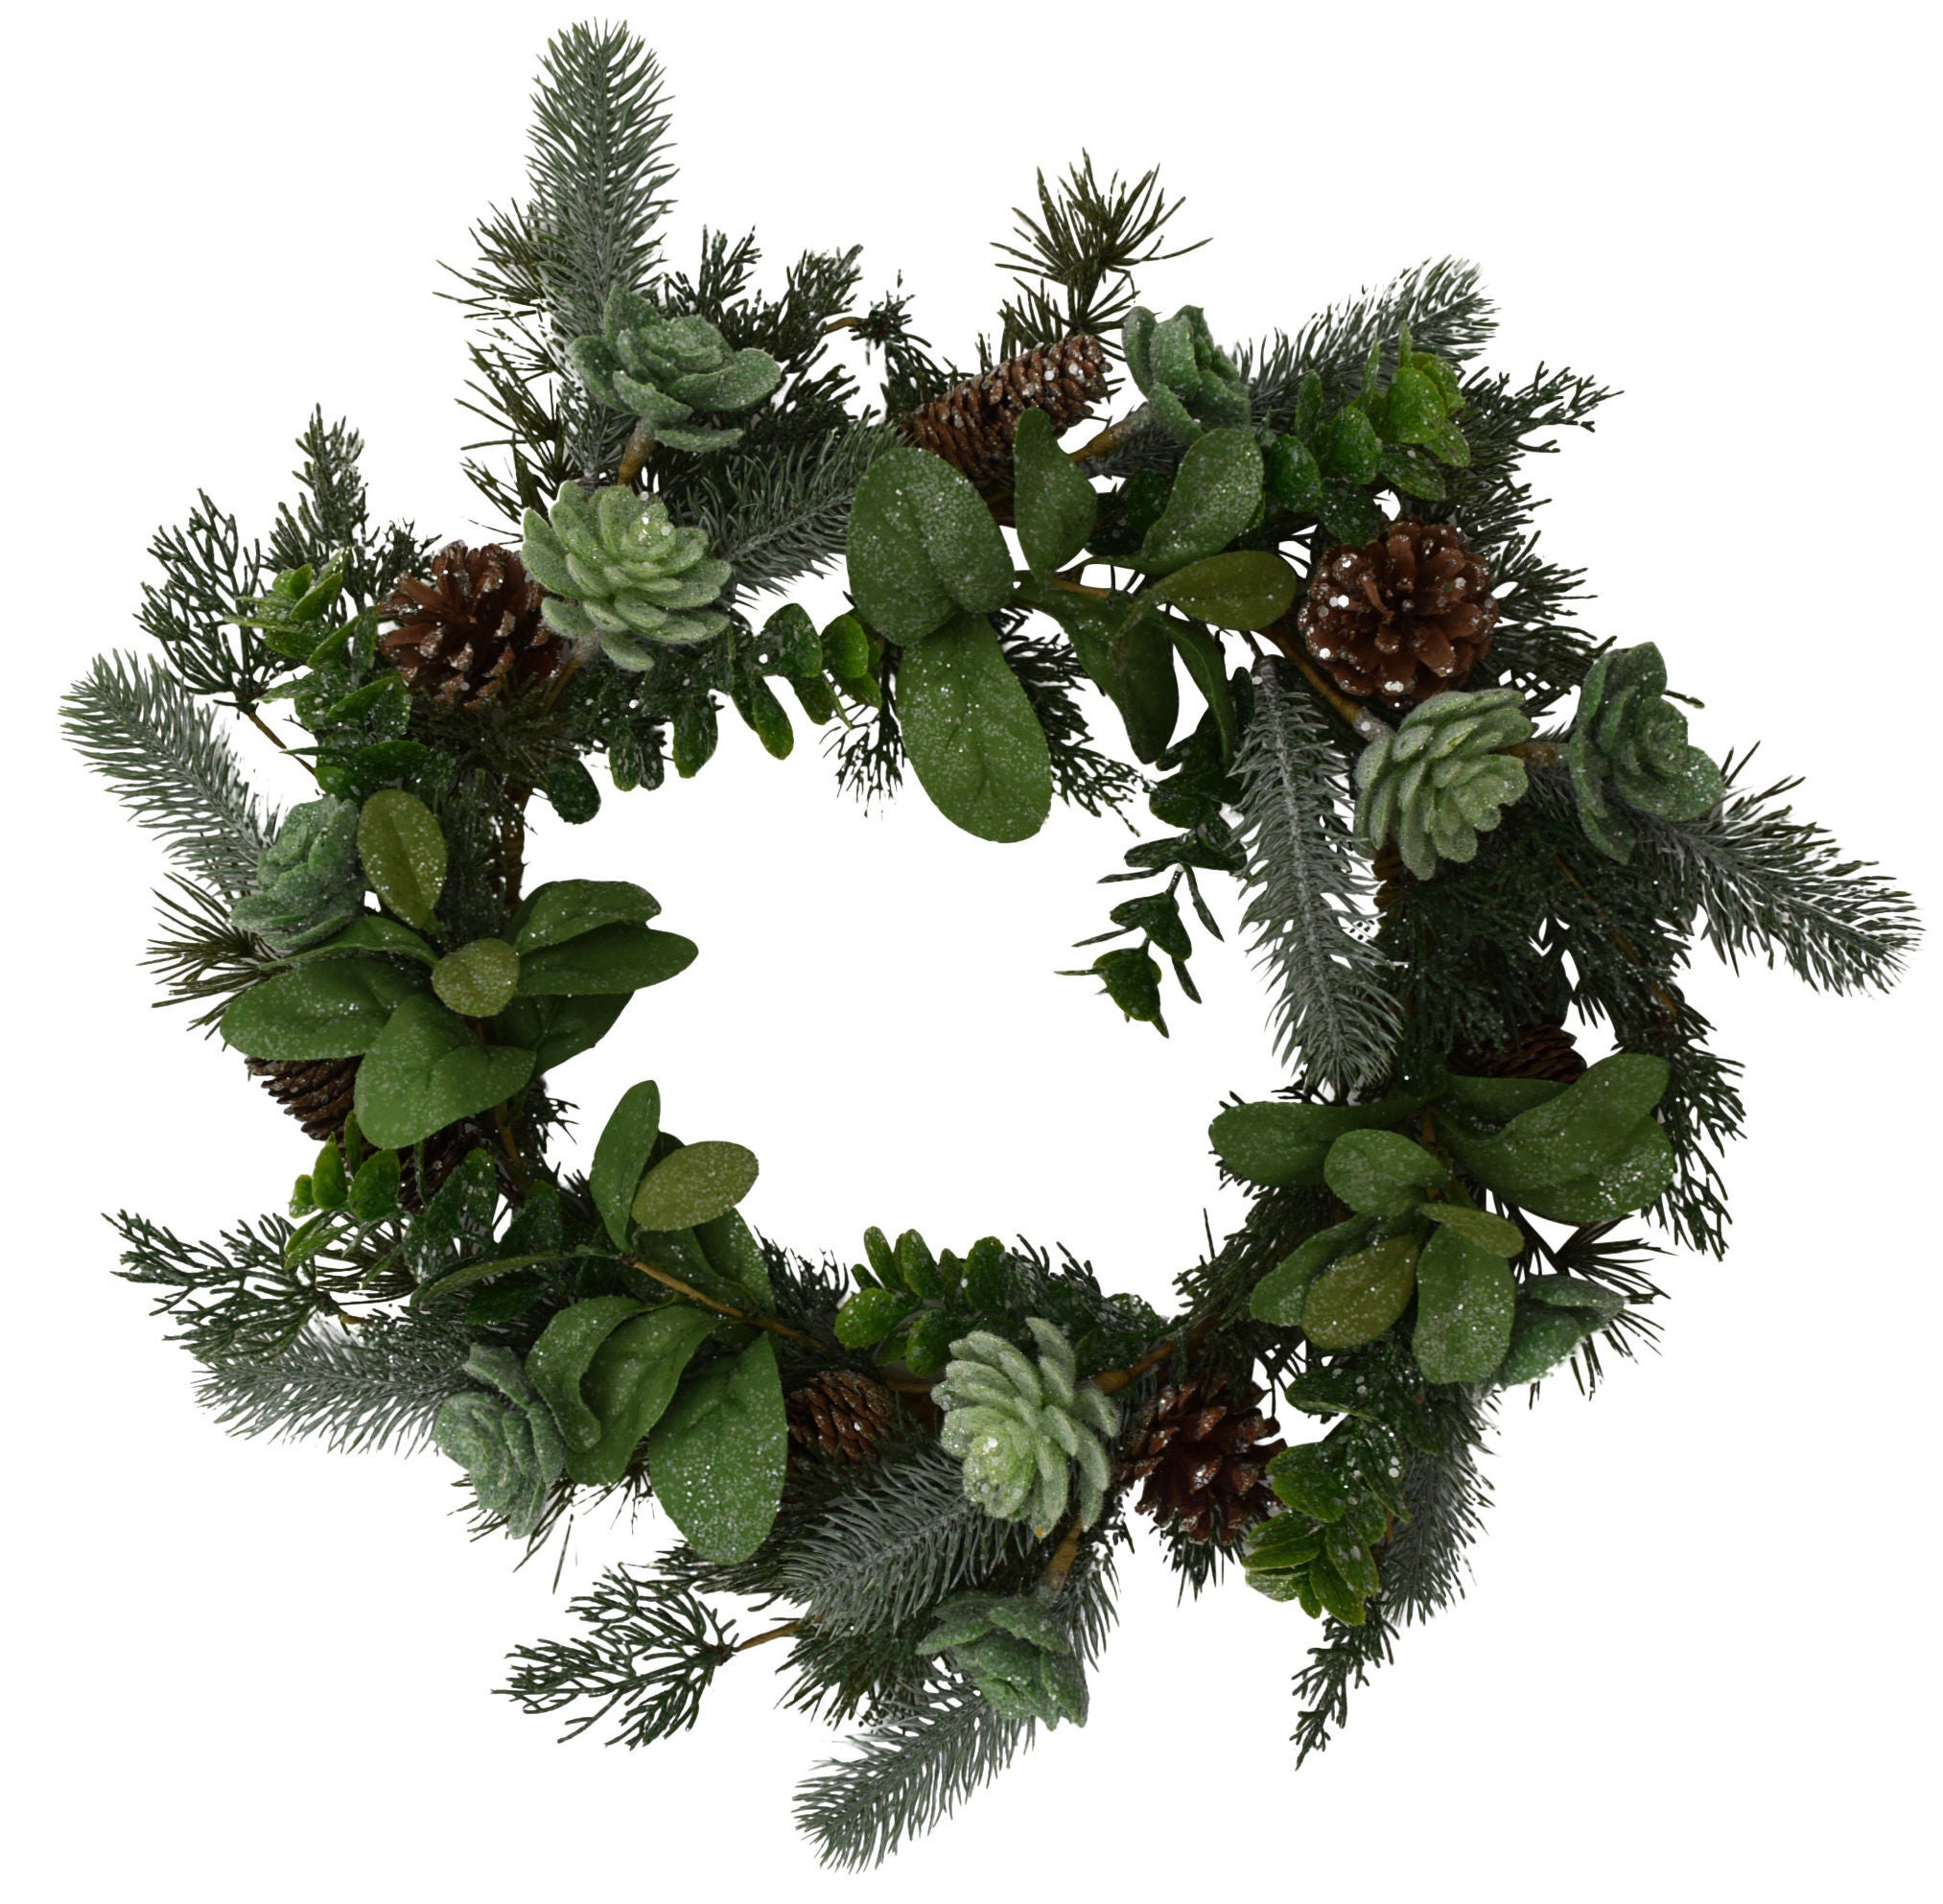 DECORATED WREATHS